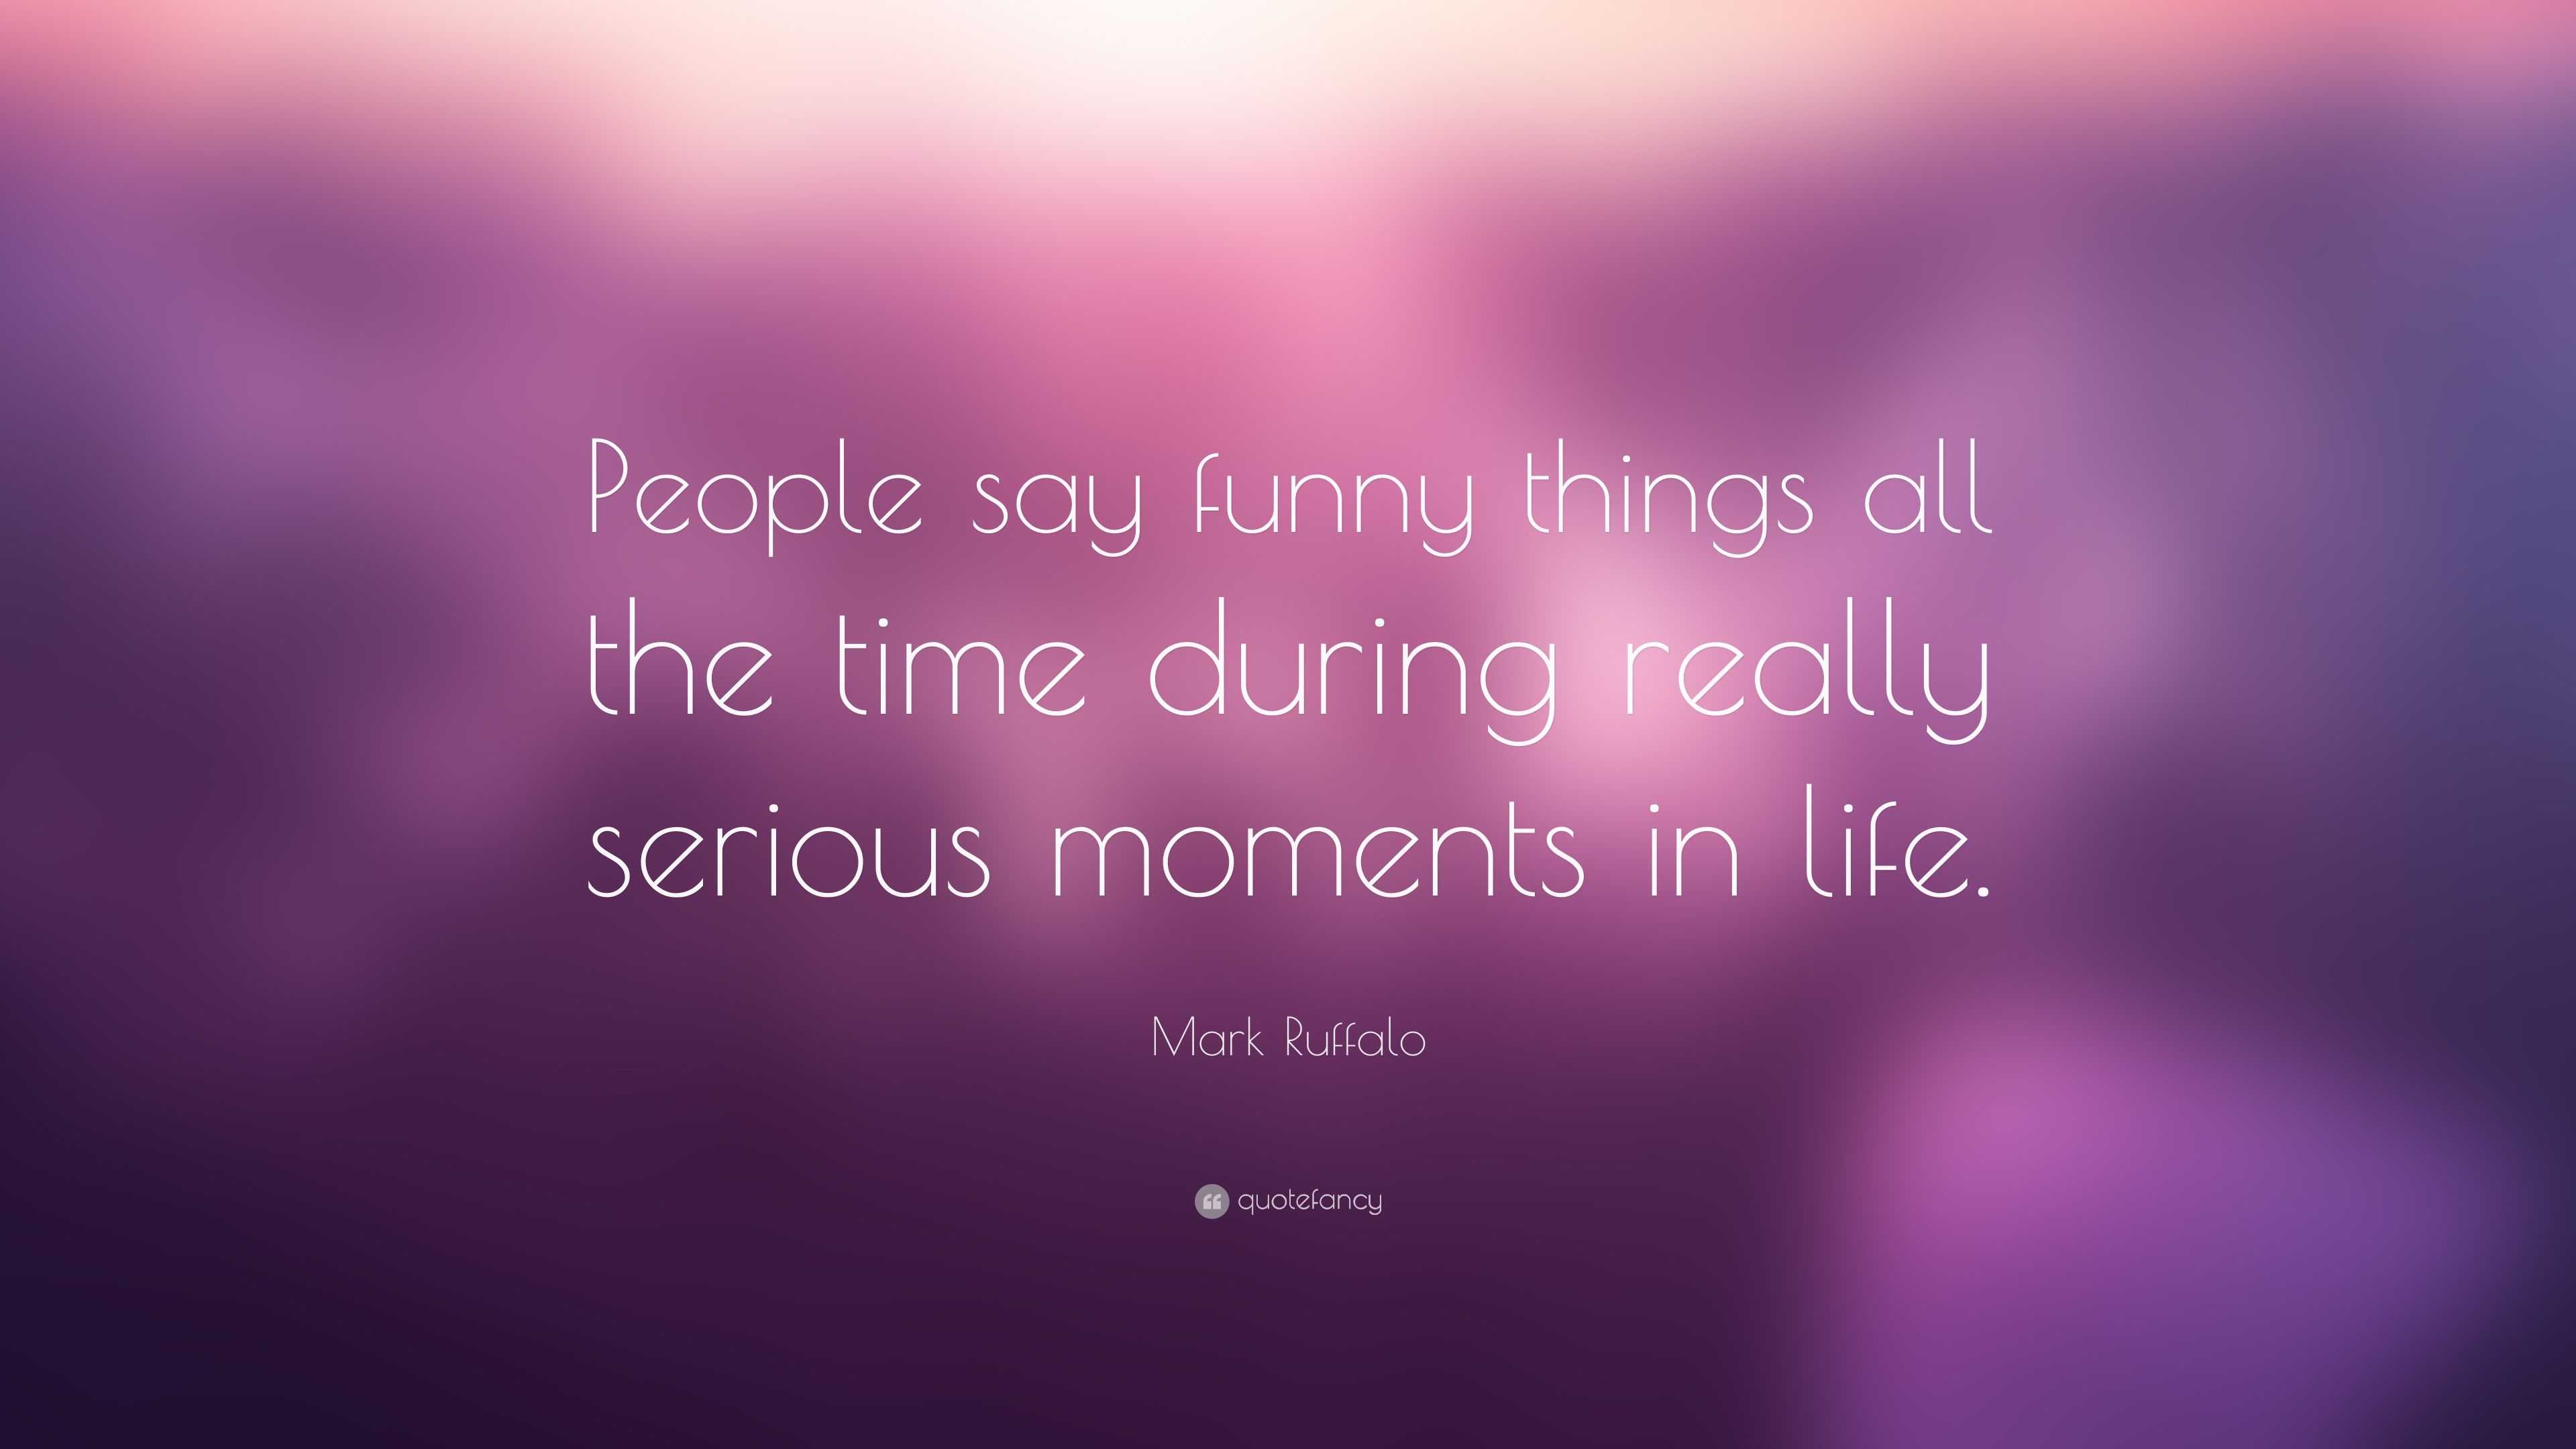 Mark Ruffalo Quote: “People say funny things all the time during really  serious moments in life.”